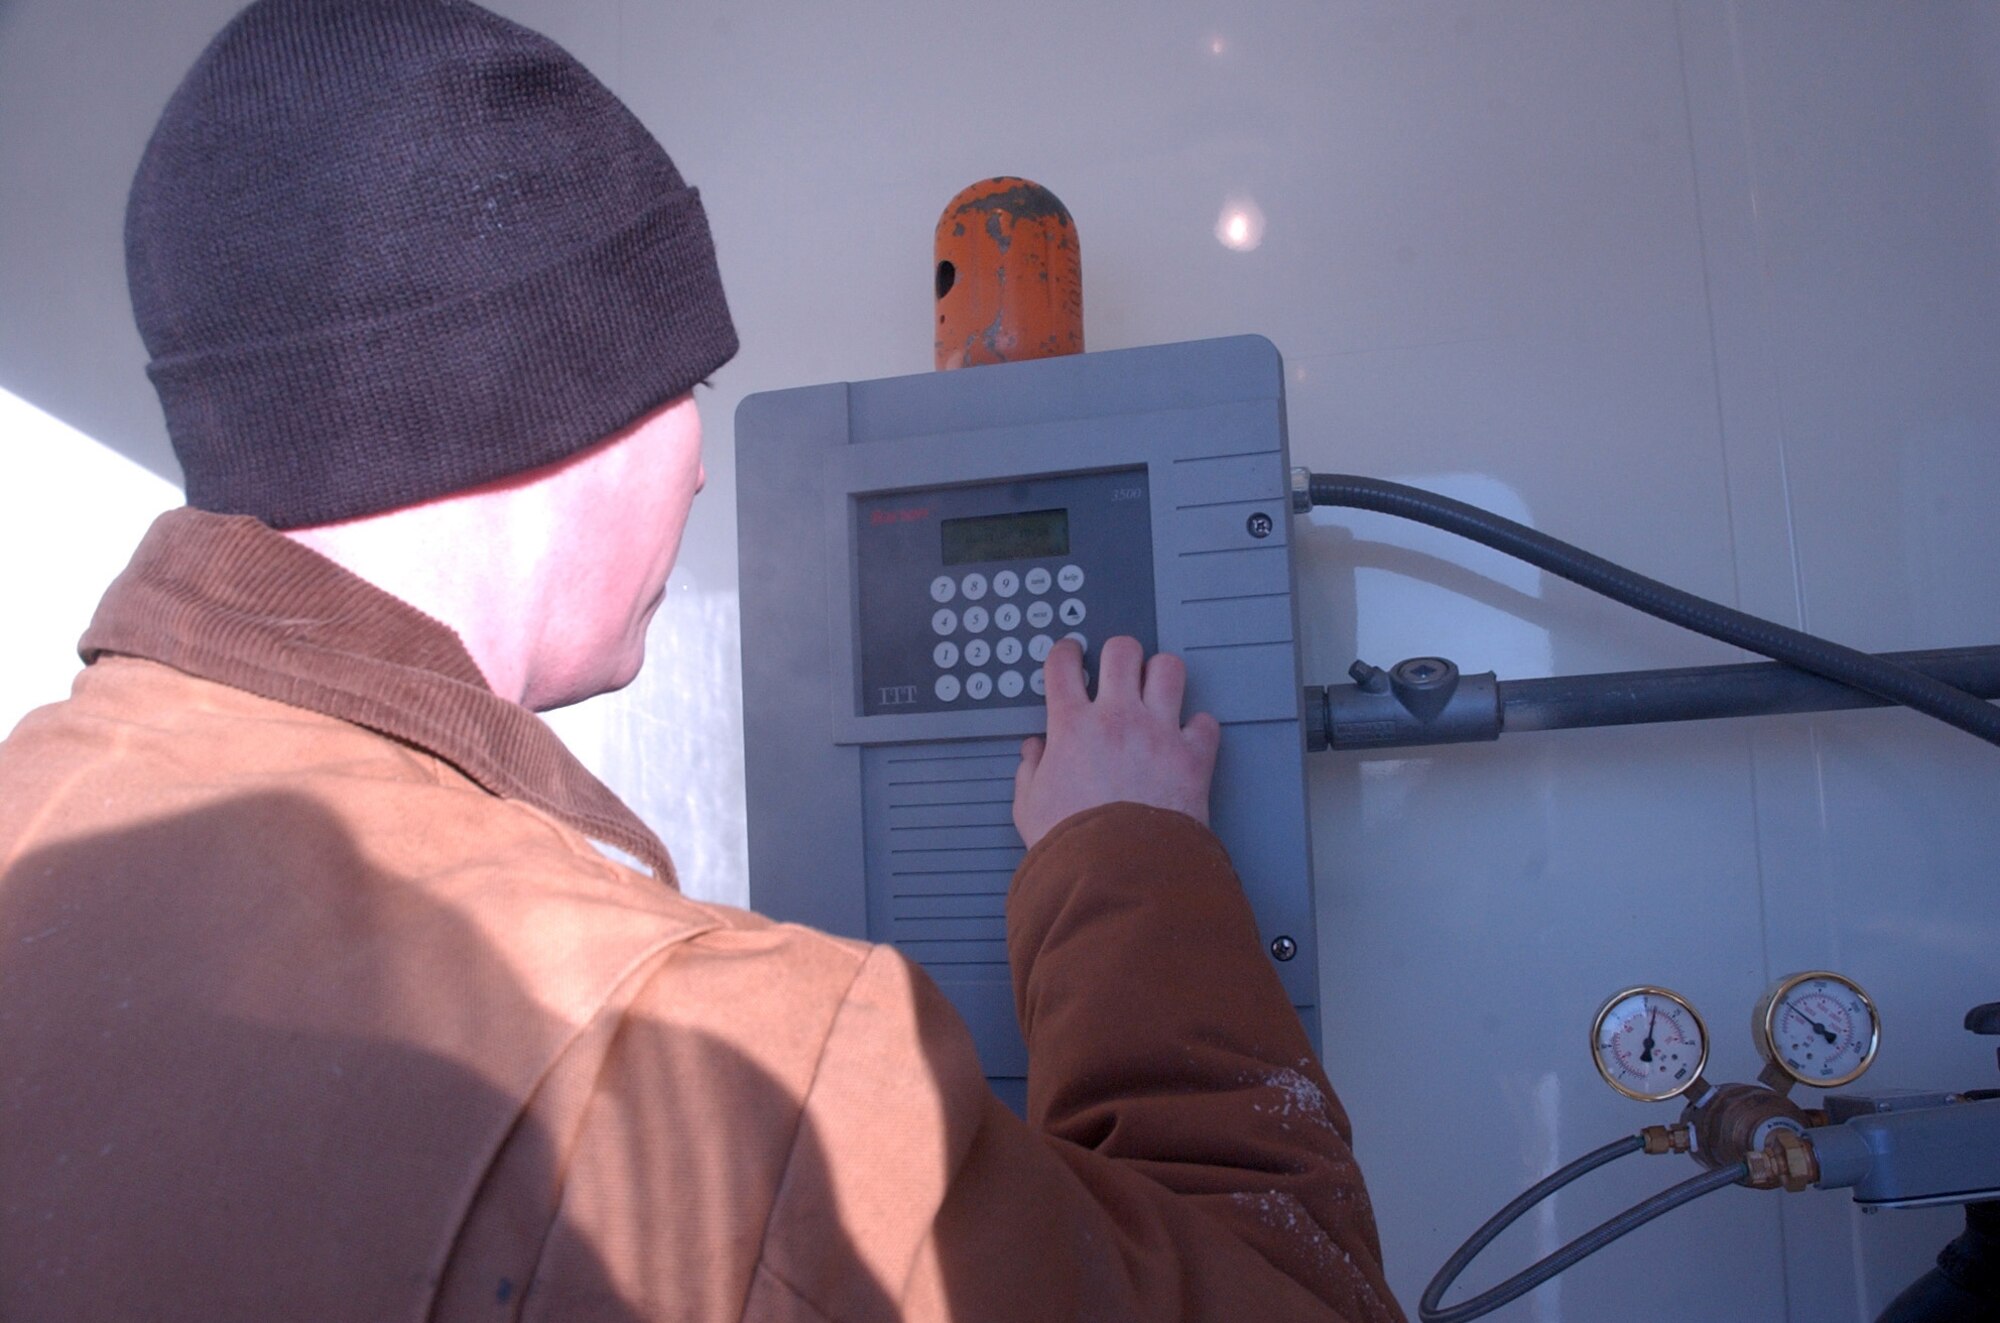 EIELSON AIR FORCE, Alaska -- Staff Sgt. Kyle Evans, 354th Logistics Squadron, checks an automatic tank gauging system to verify how much fuel is in the bulk storage fuel tanks. The fuels team manages the fourth largest fuel storage area in the Air Force. (U.S. Air Force photo by Senior Airman Justin Weaver)